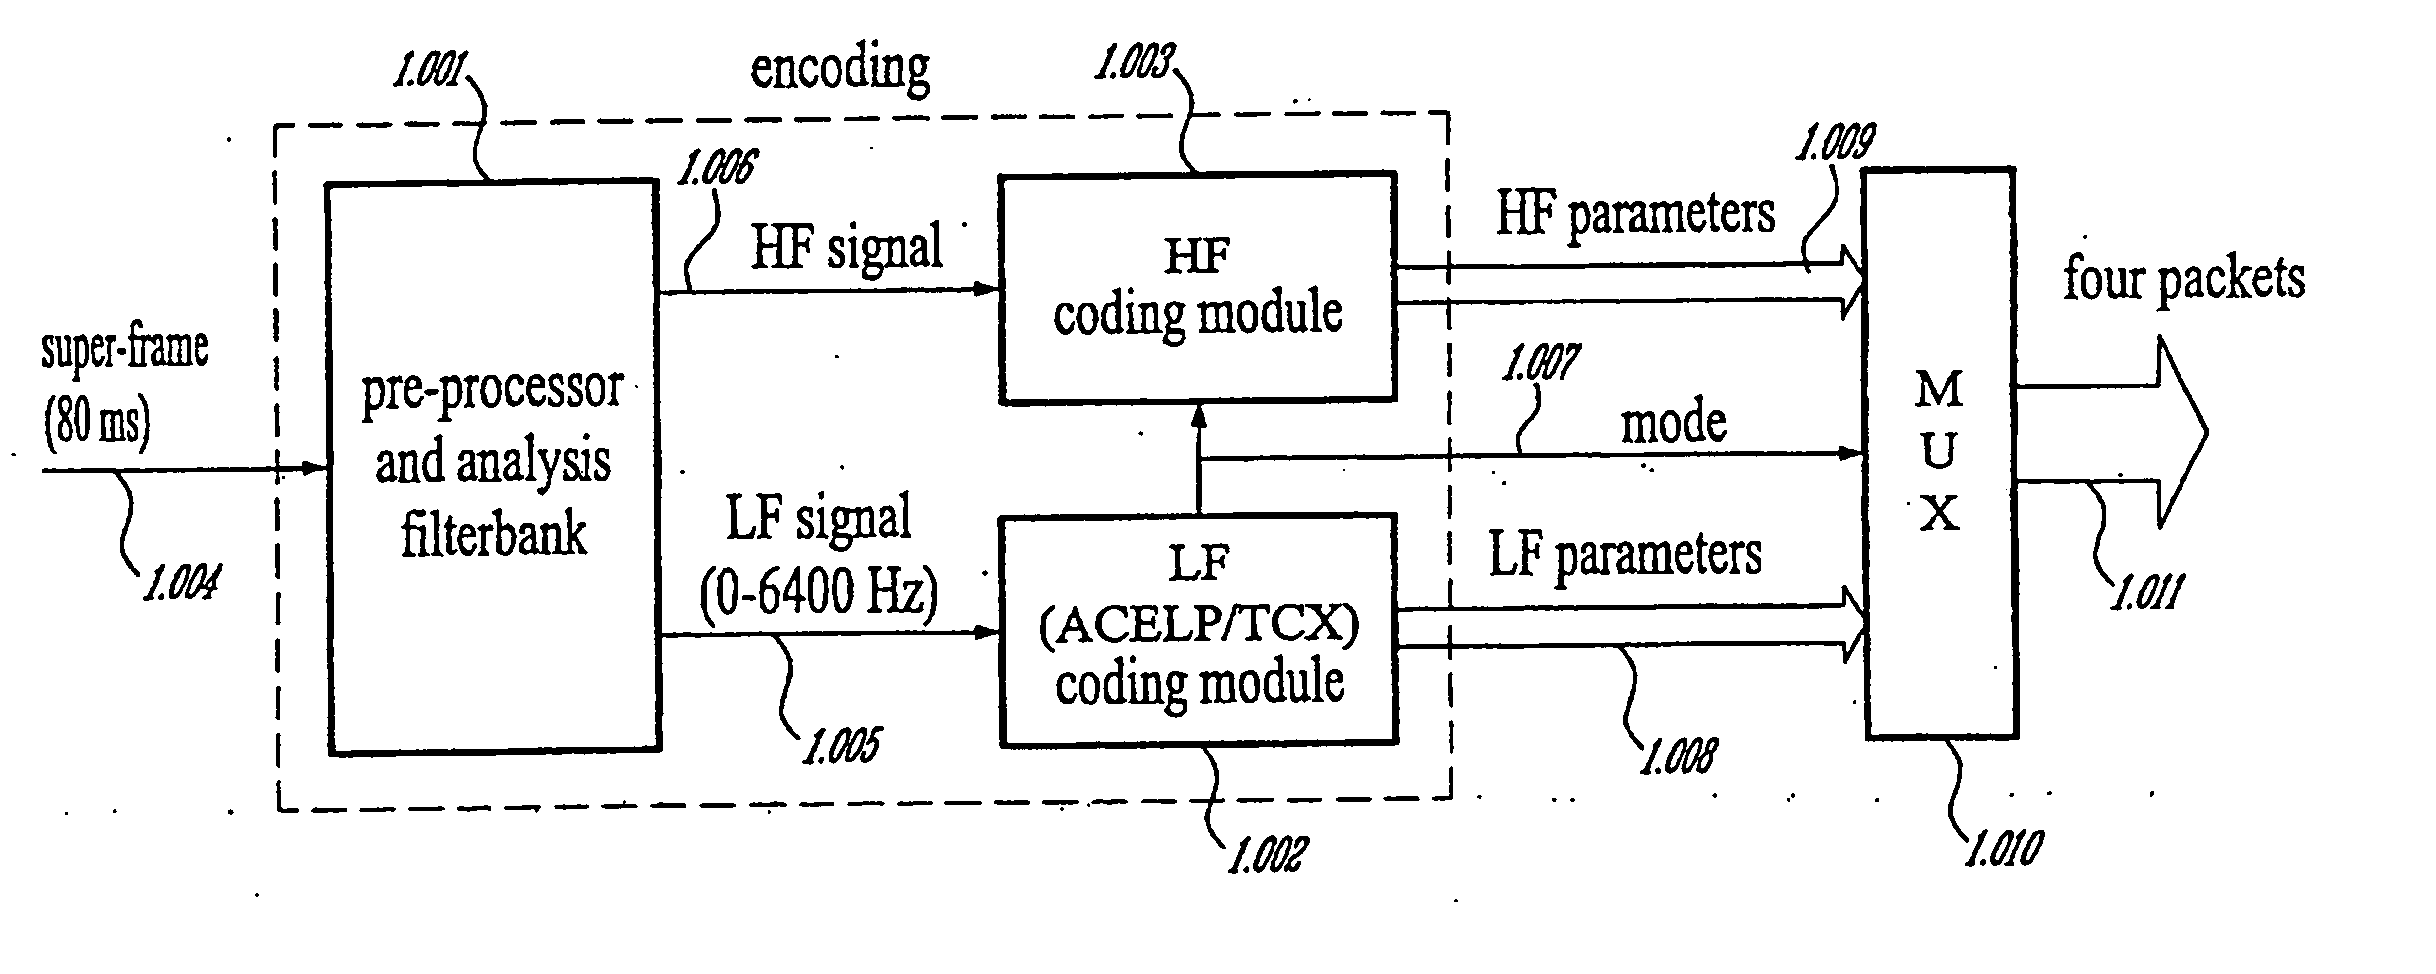 Methods and devices for low-frequency emphasis during audio compression based on ACELP/TCX